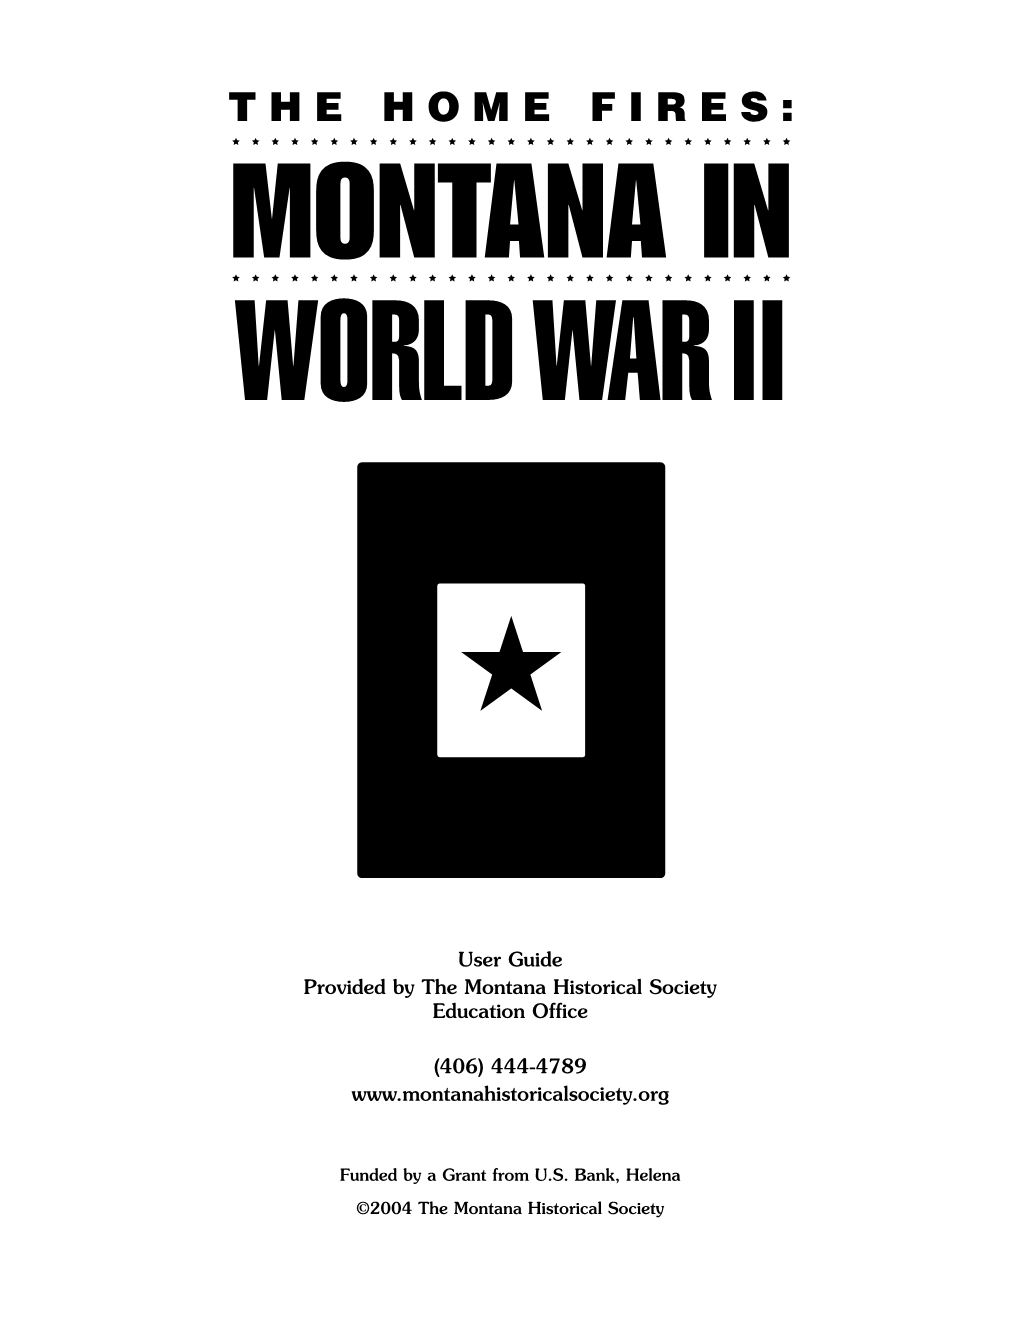 The Home Fires: Montana and World War II—Describes Aspects of Everyday Life in Montana Life During the 1941-1945 War Years